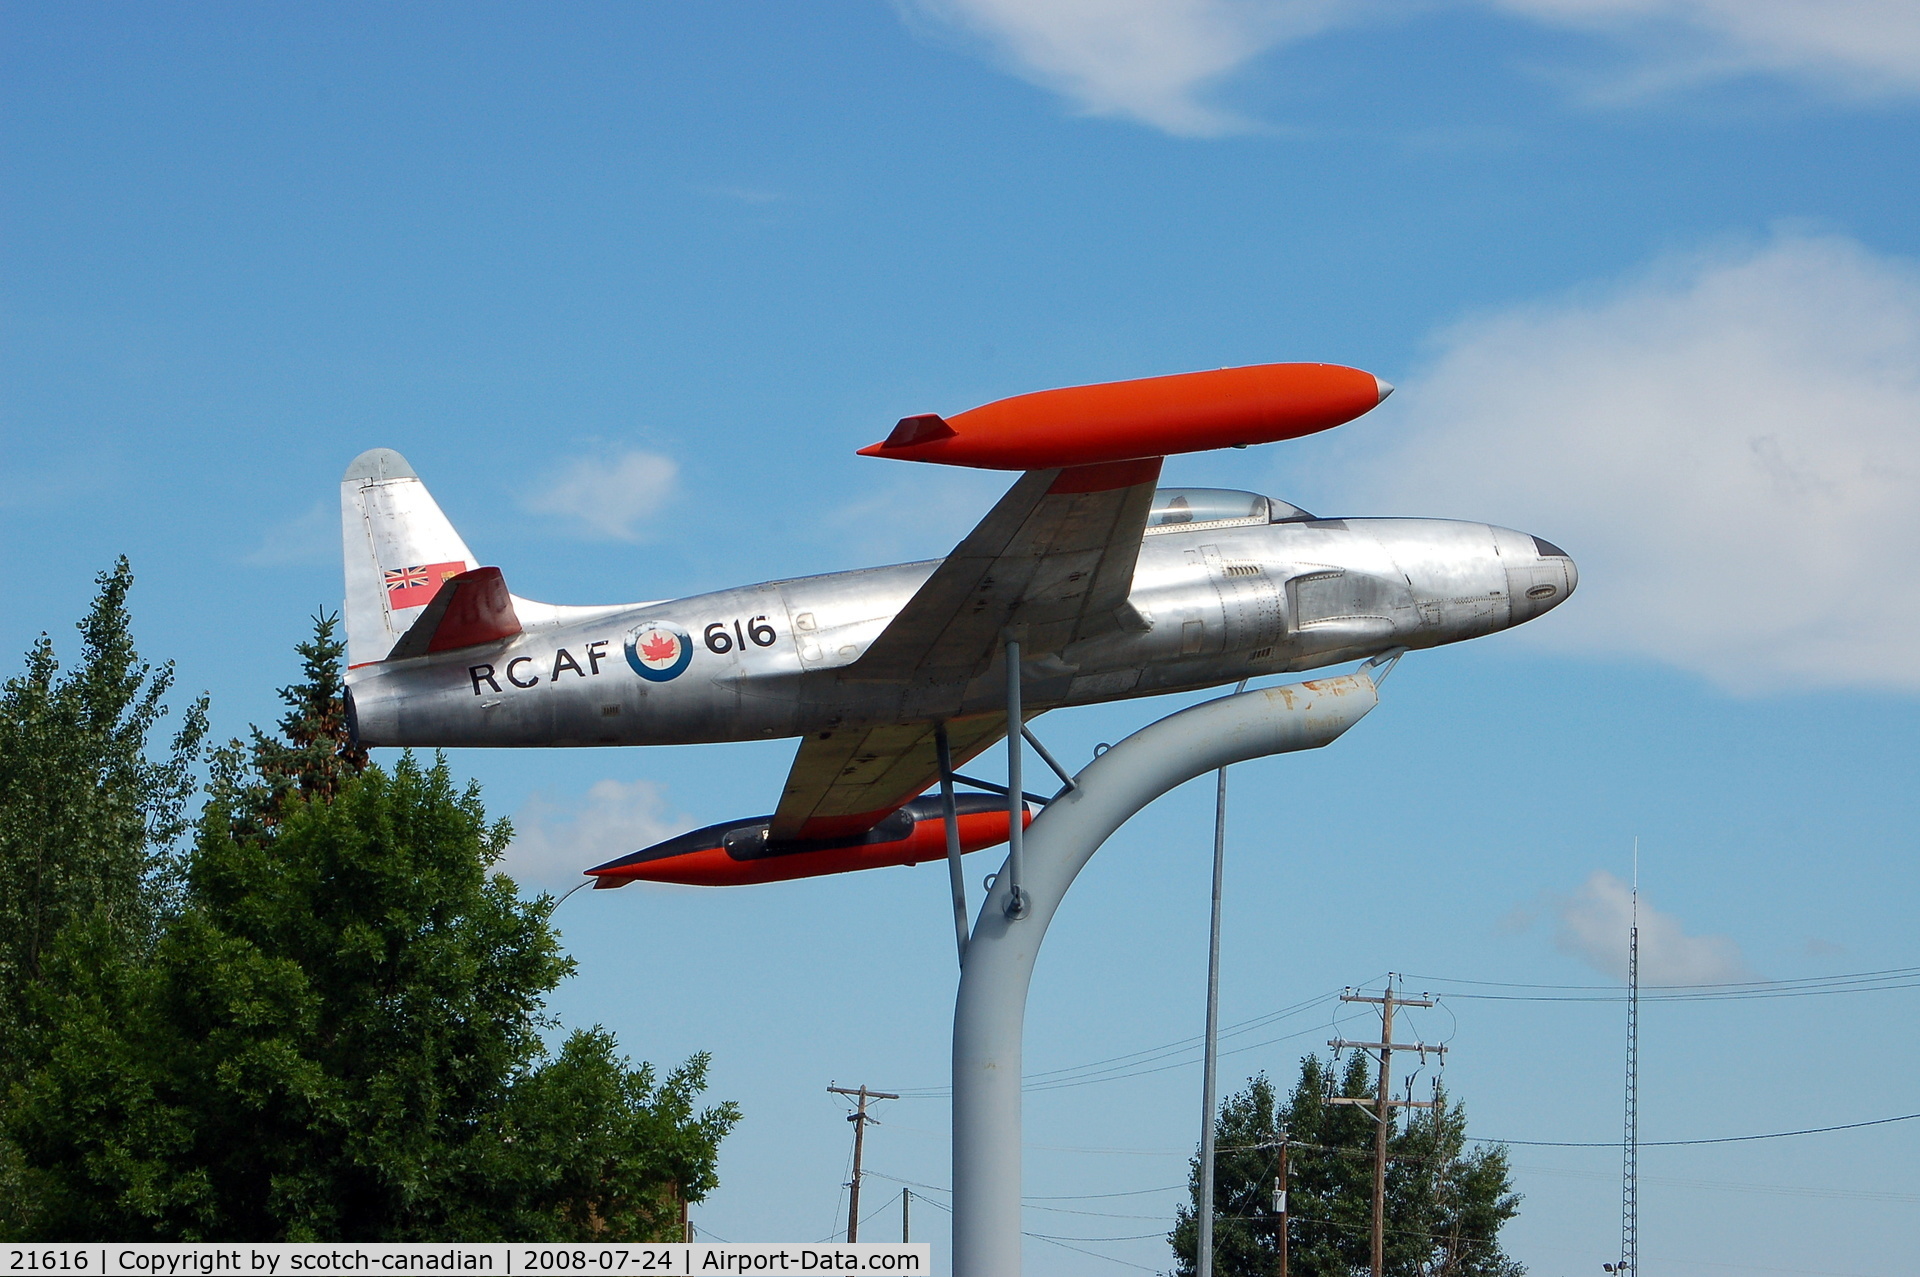 21616, Canadair CT-133 Silver Star 3 C/N T33-616, Canadair T-33 at the Bomber Command Museum of Canada - Nanton, Alberta, Canada